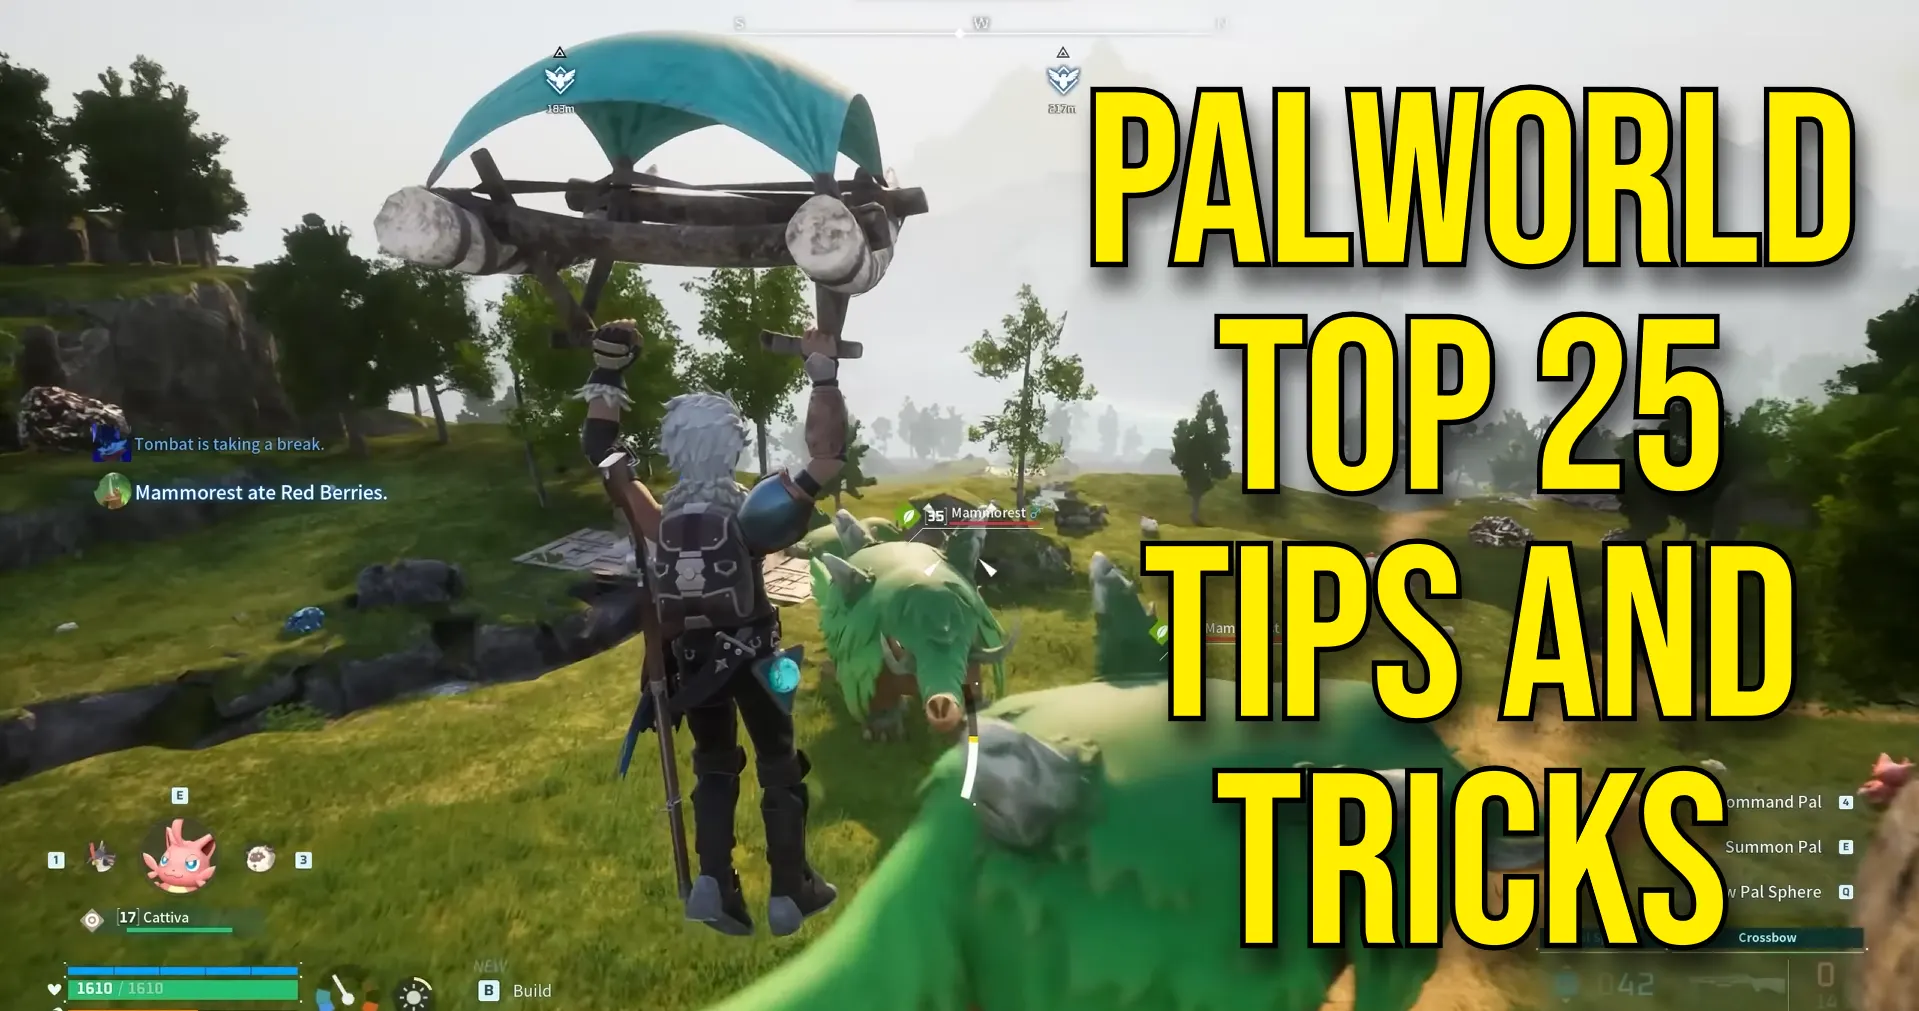 Palworld Top 25 Tips and Tricks